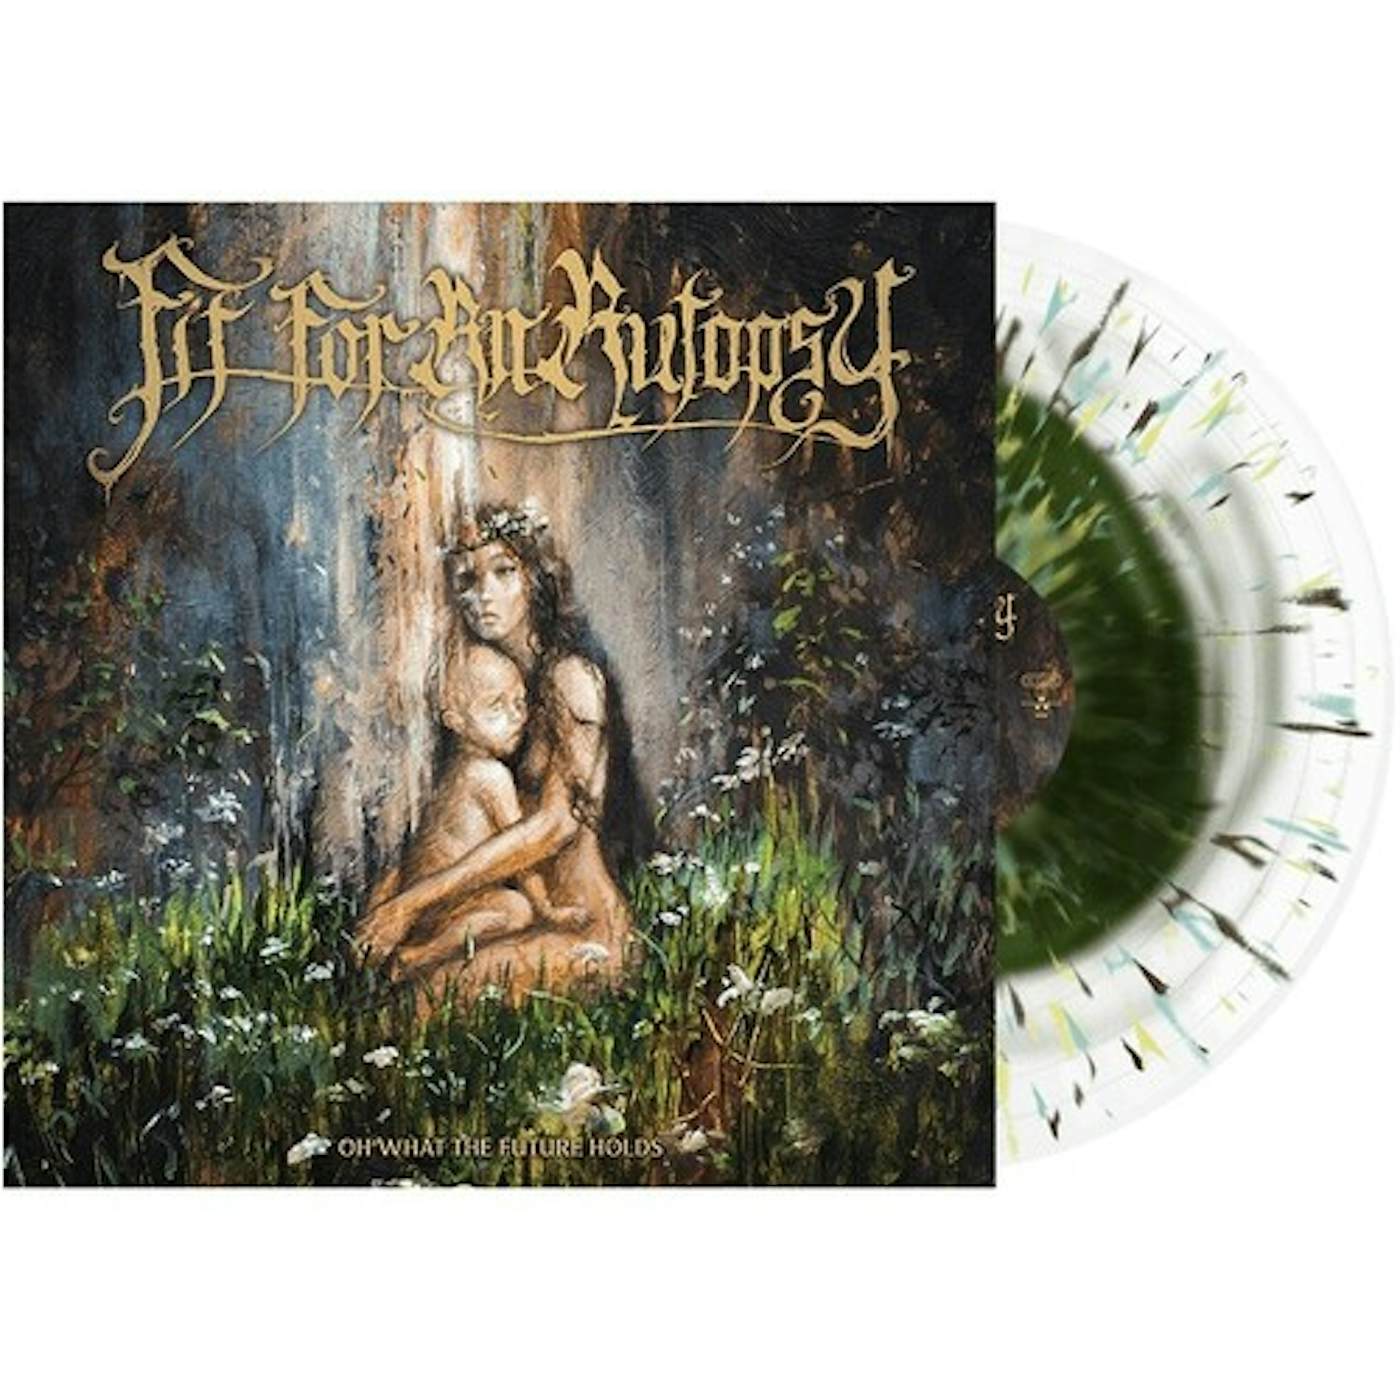 Fit For An Autopsy Oh What The Future Holds (Green In Clear) Vinyl Record